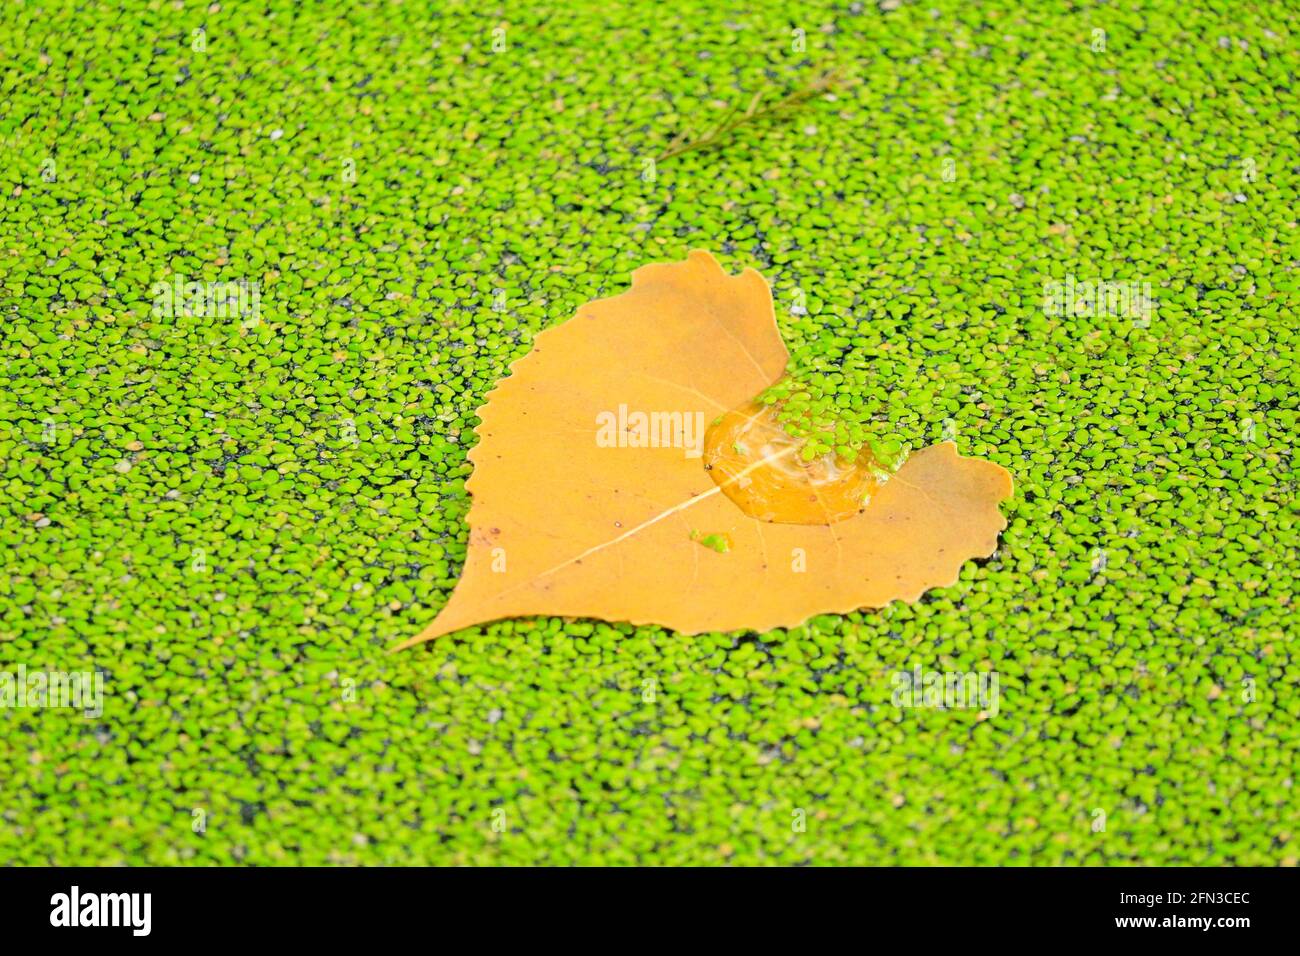 Eastern cottonwood leaf (Populus deltoides) on top of duckweed in autumn. Salt Creek Nature Preserve, Cook County, Illinois. Stock Photo